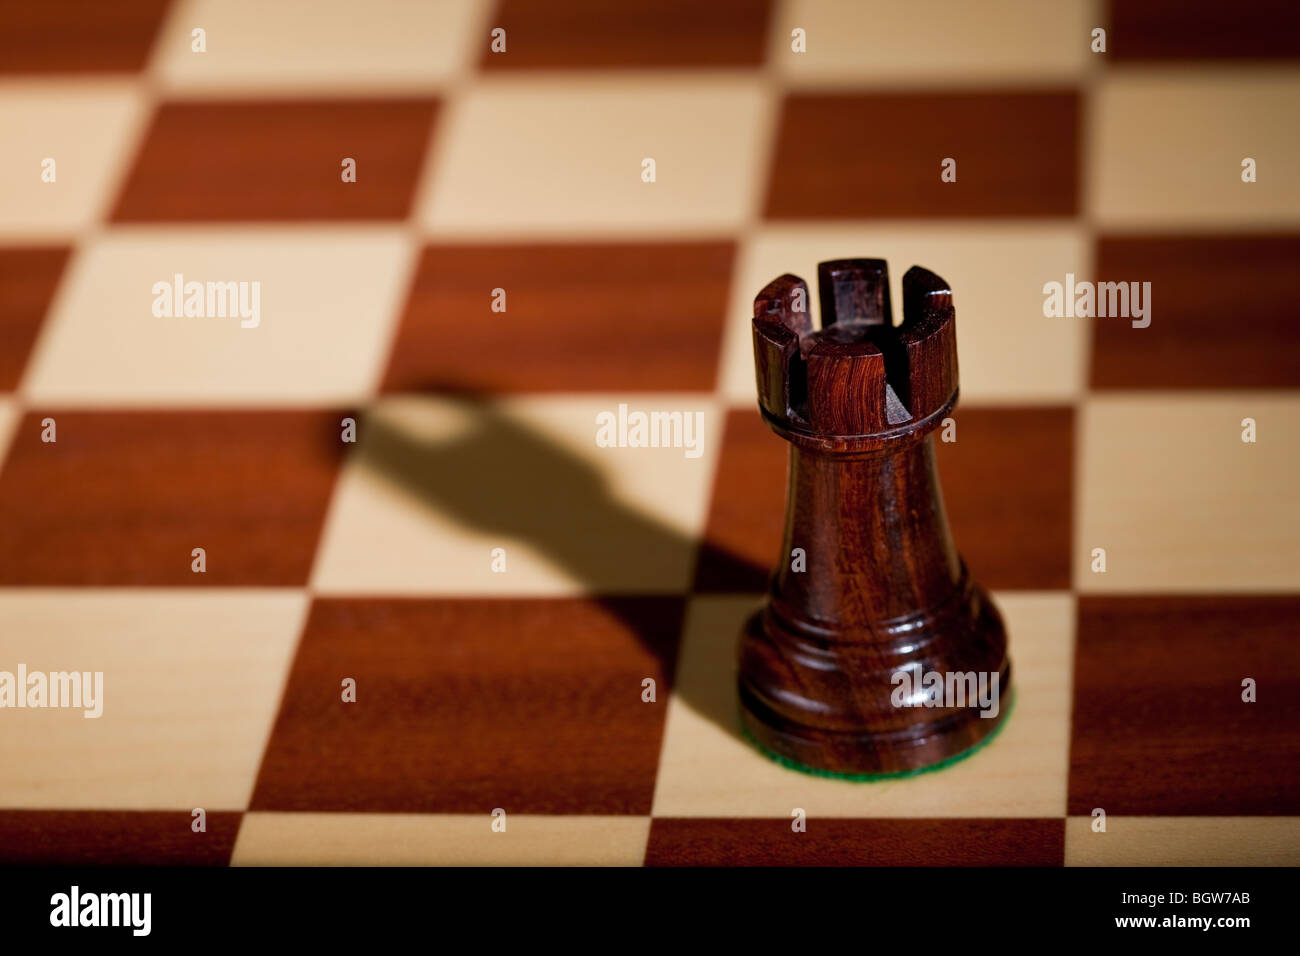 Close-up of a rook chess piece Stock Photo - Alamy